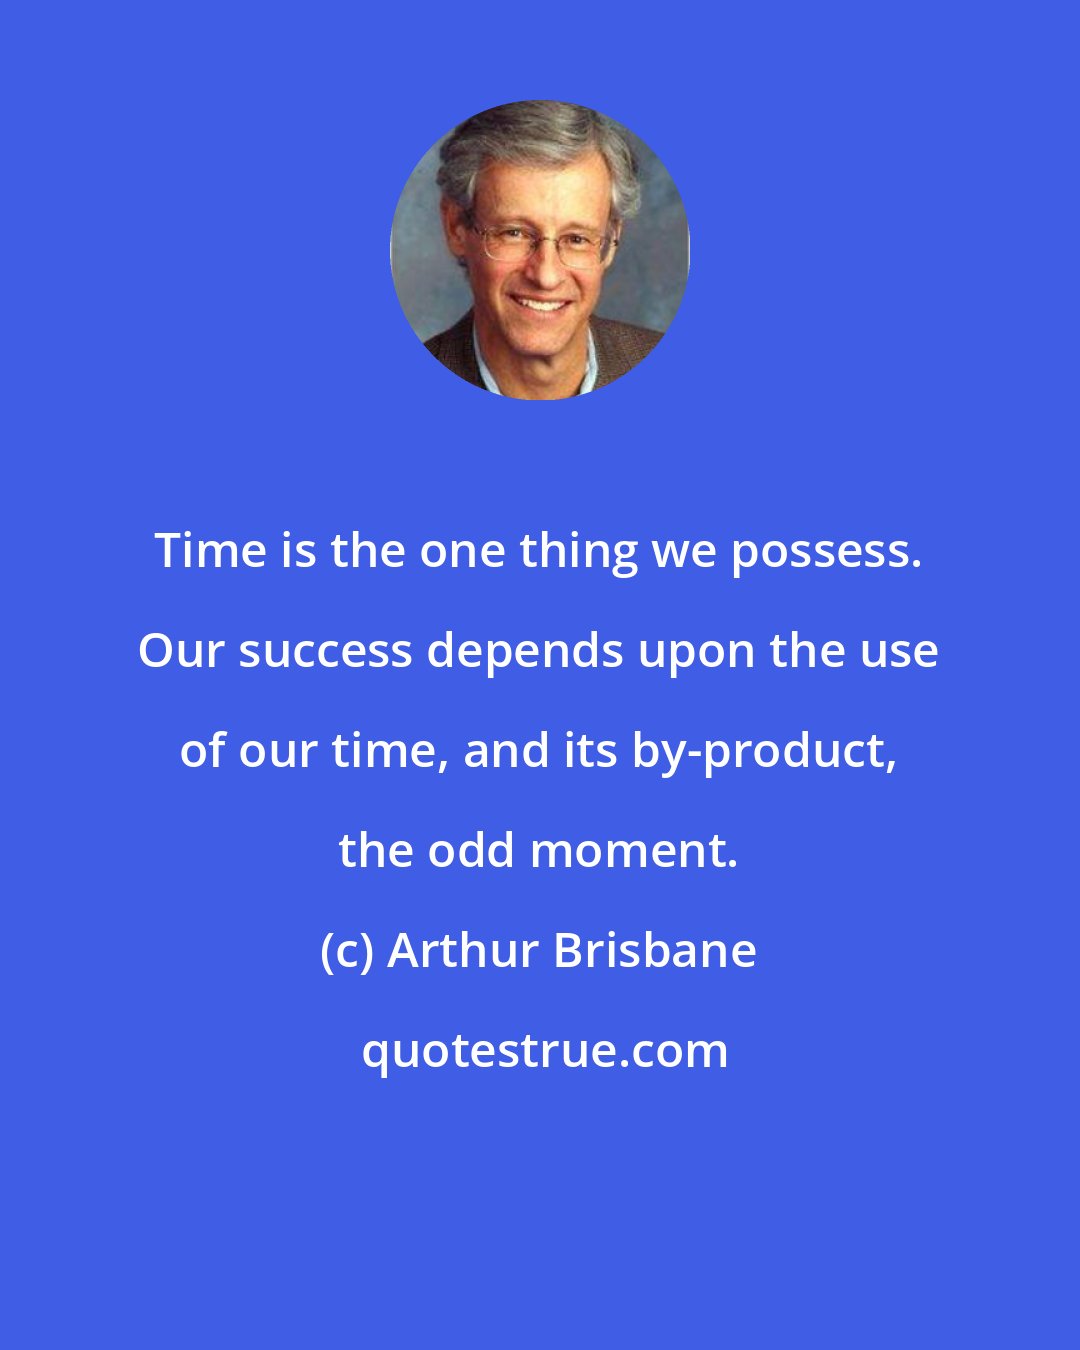 Arthur Brisbane: Time is the one thing we possess. Our success depends upon the use of our time, and its by-product, the odd moment.